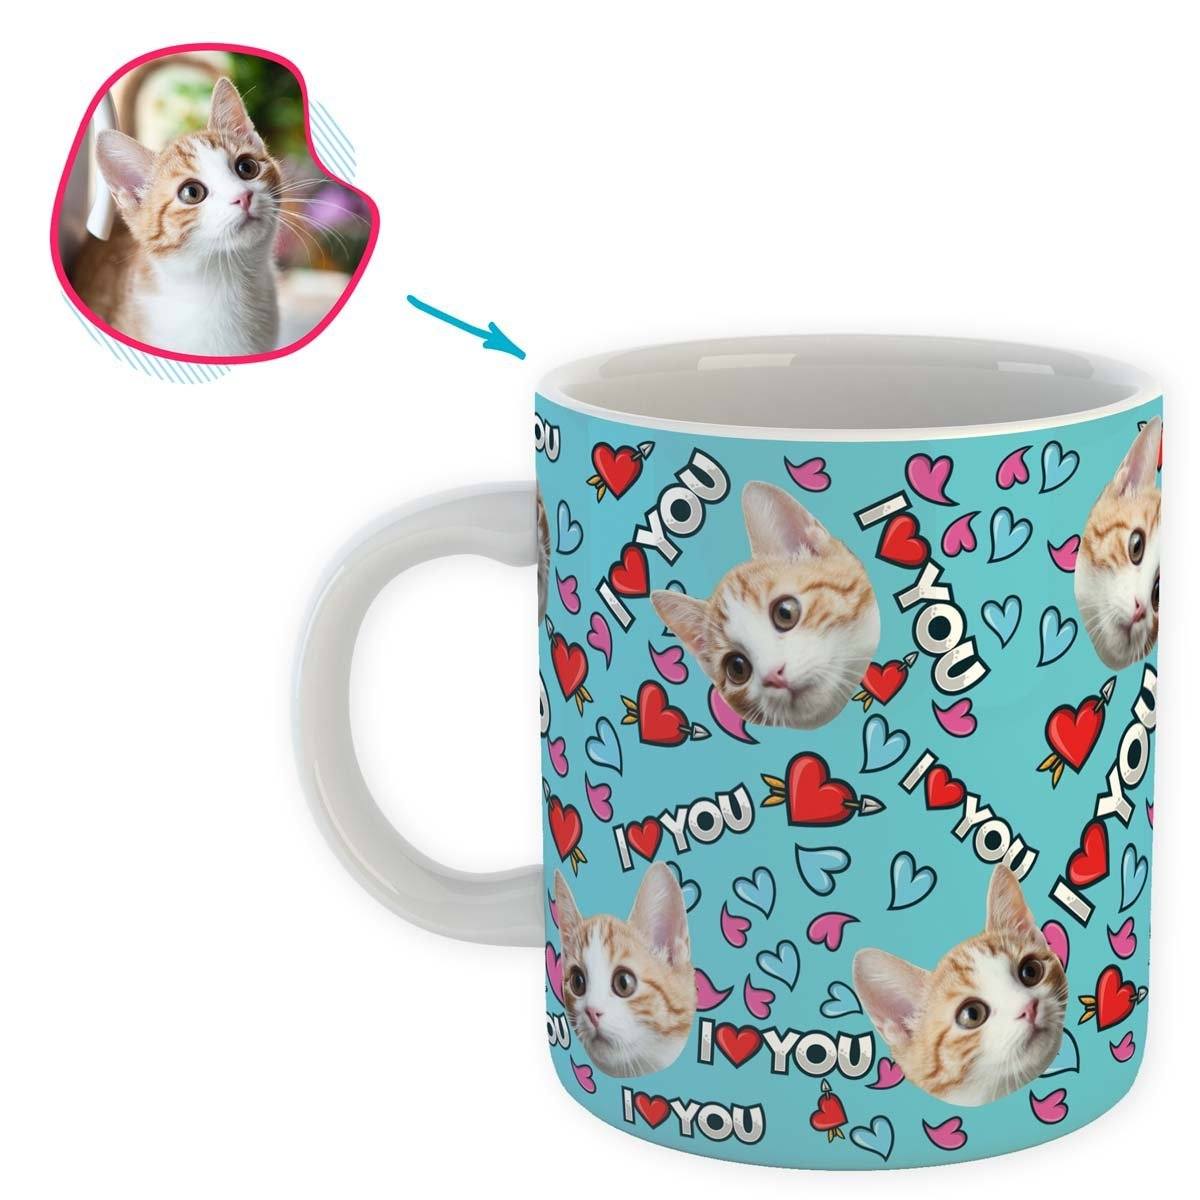 blue Love You mug personalized with photo of face printed on it